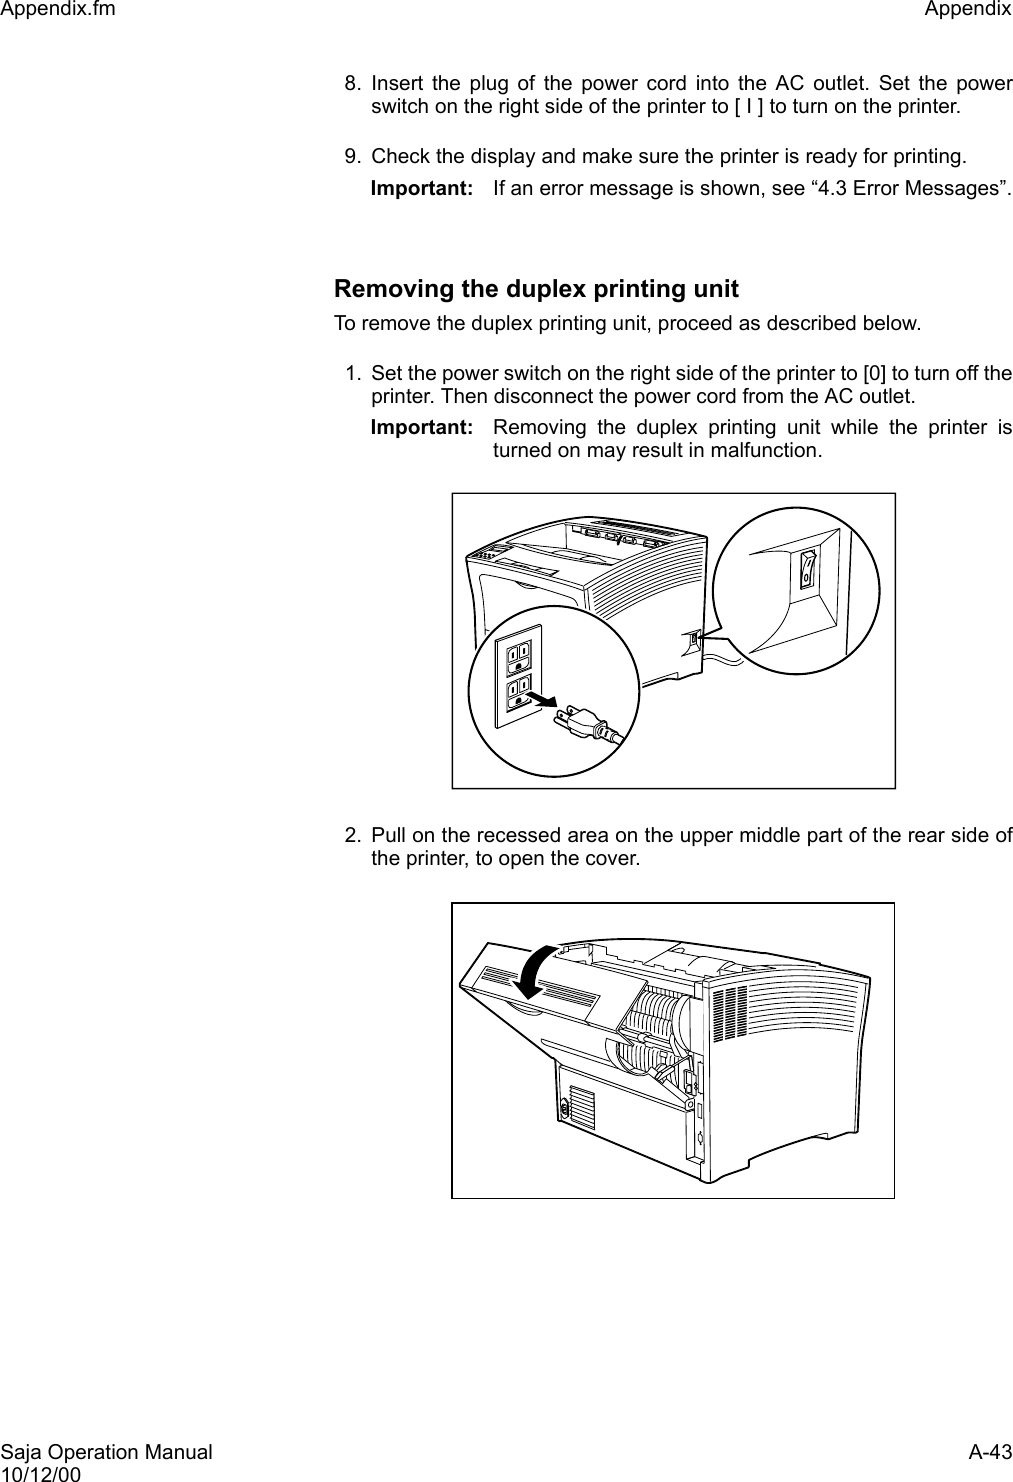 Saja Operation Manual A-4310/12/00Appendix.fm Appendix 8. Insert the plug of the power cord into the AC outlet. Set the powerswitch on the right side of the printer to [ I ] to turn on the printer.9. Check the display and make sure the printer is ready for printing.Important: If an error message is shown, see “4.3 Error Messages”.Removing the duplex printing unitTo remove the duplex printing unit, proceed as described below. 1. Set the power switch on the right side of the printer to [0] to turn off theprinter. Then disconnect the power cord from the AC outlet. Important: Removing the duplex printing unit while the printer isturned on may result in malfunction.2. Pull on the recessed area on the upper middle part of the rear side ofthe printer, to open the cover. 